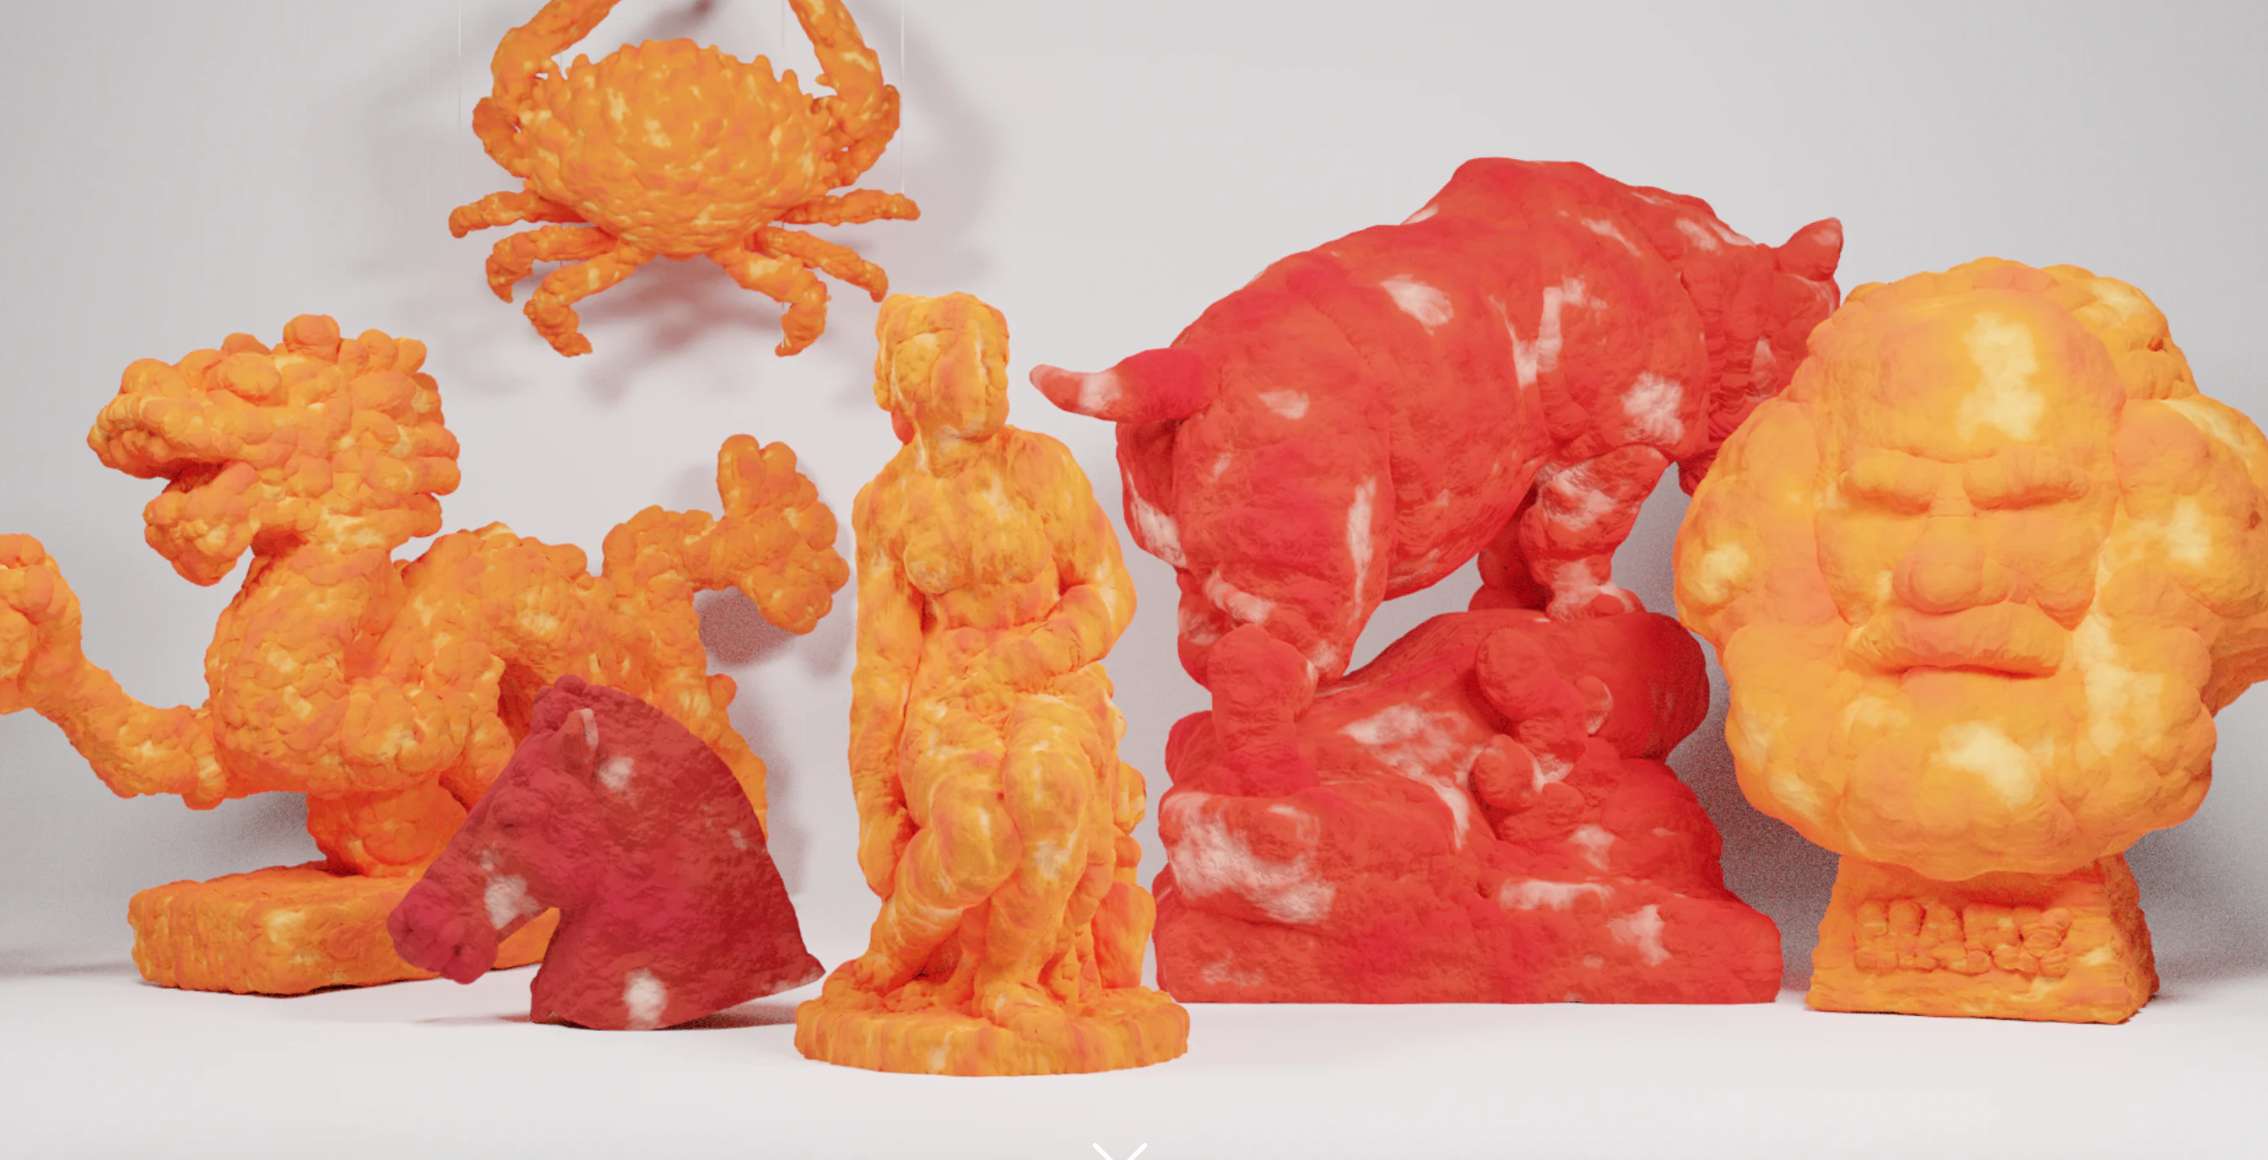 The Dangerously Cheesy Collectible Cheetos Market